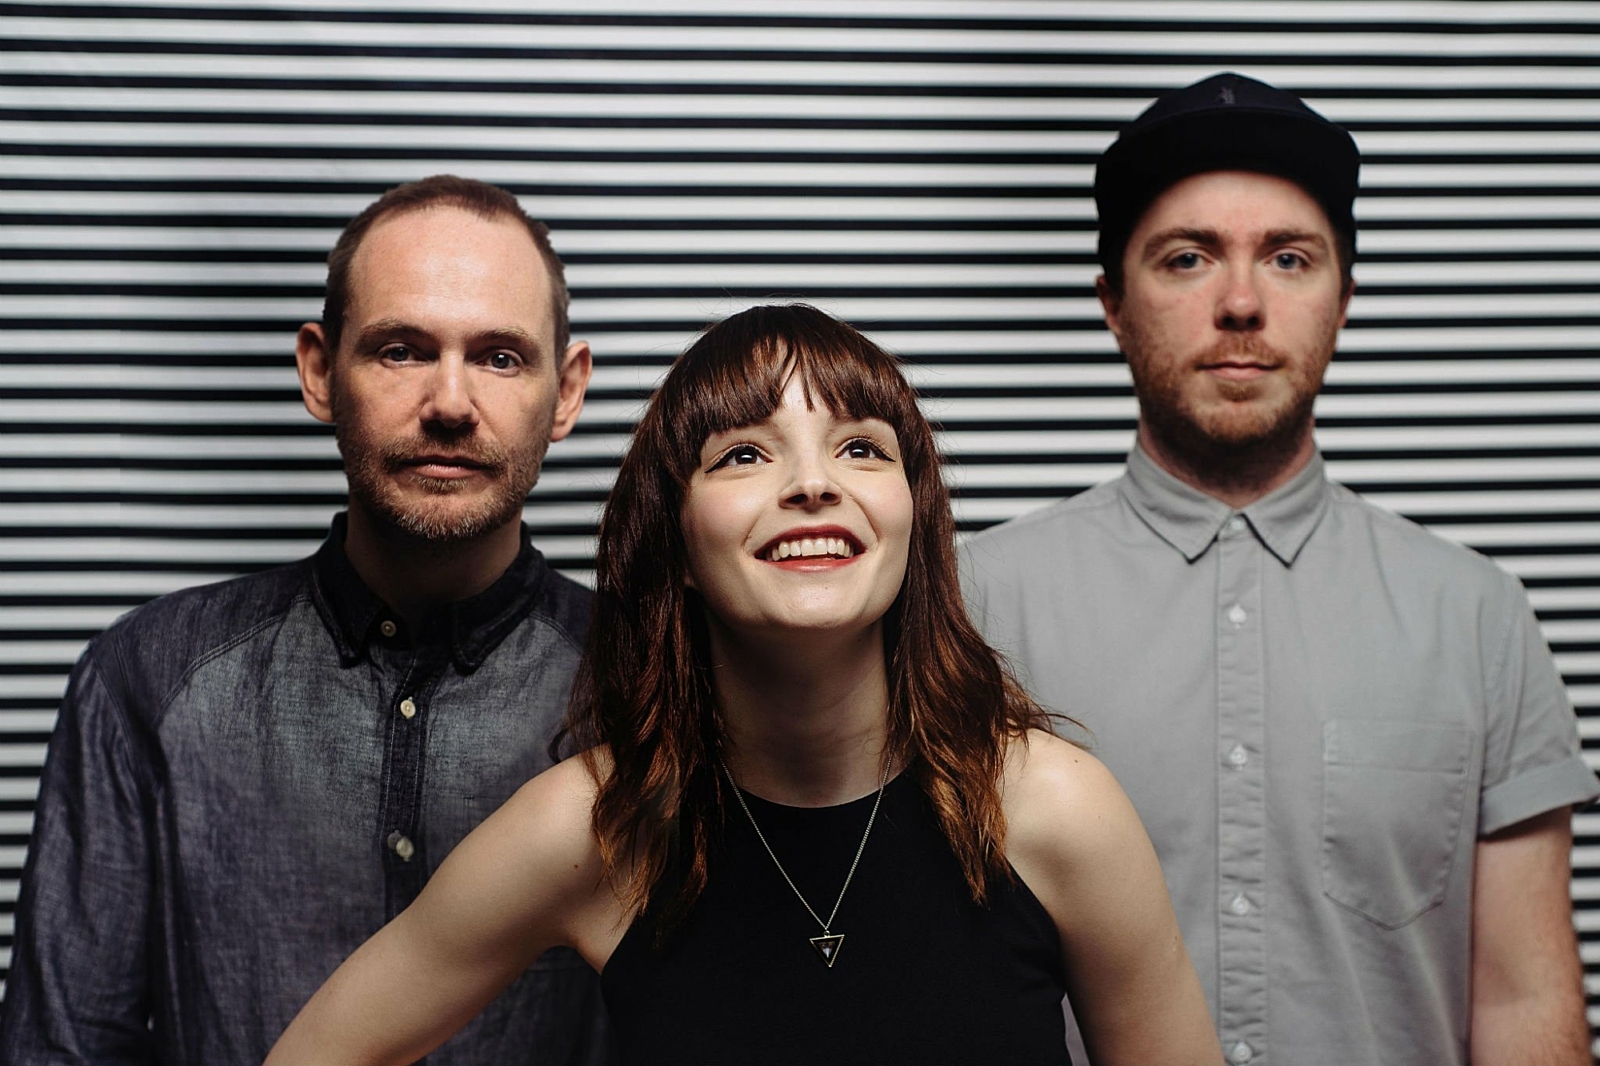 ​New issue of DIY out now, feat. Chvrches, The Dead Weather, Spring King & more